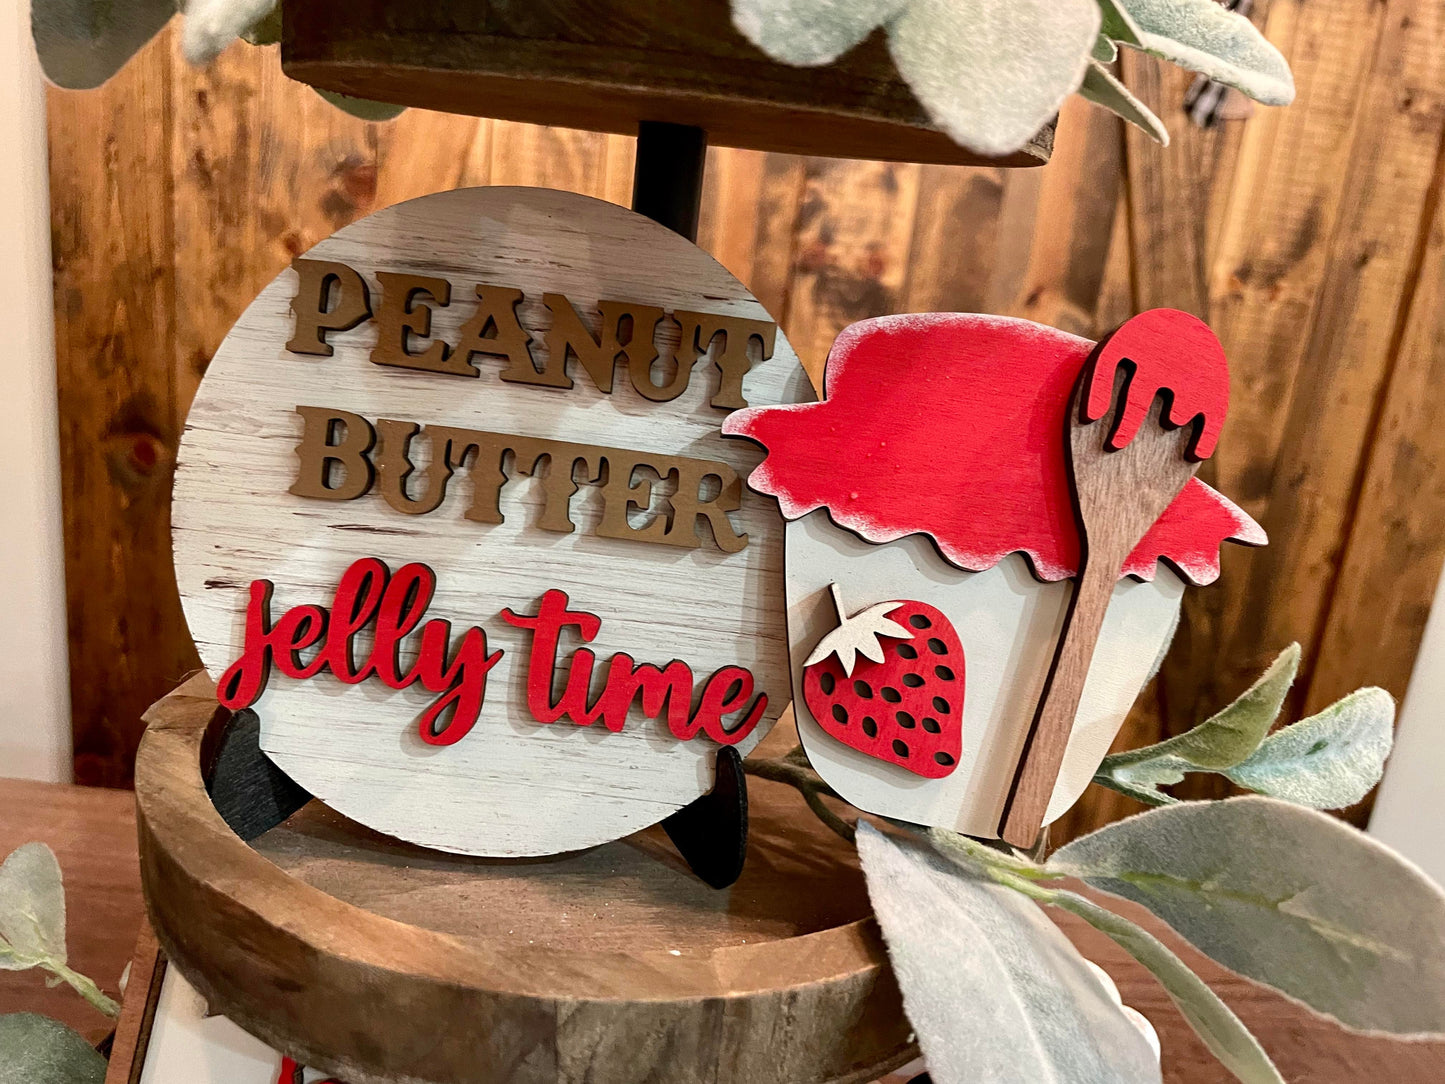 3D Tiered Tray Decor - Peanut butter and Jelly